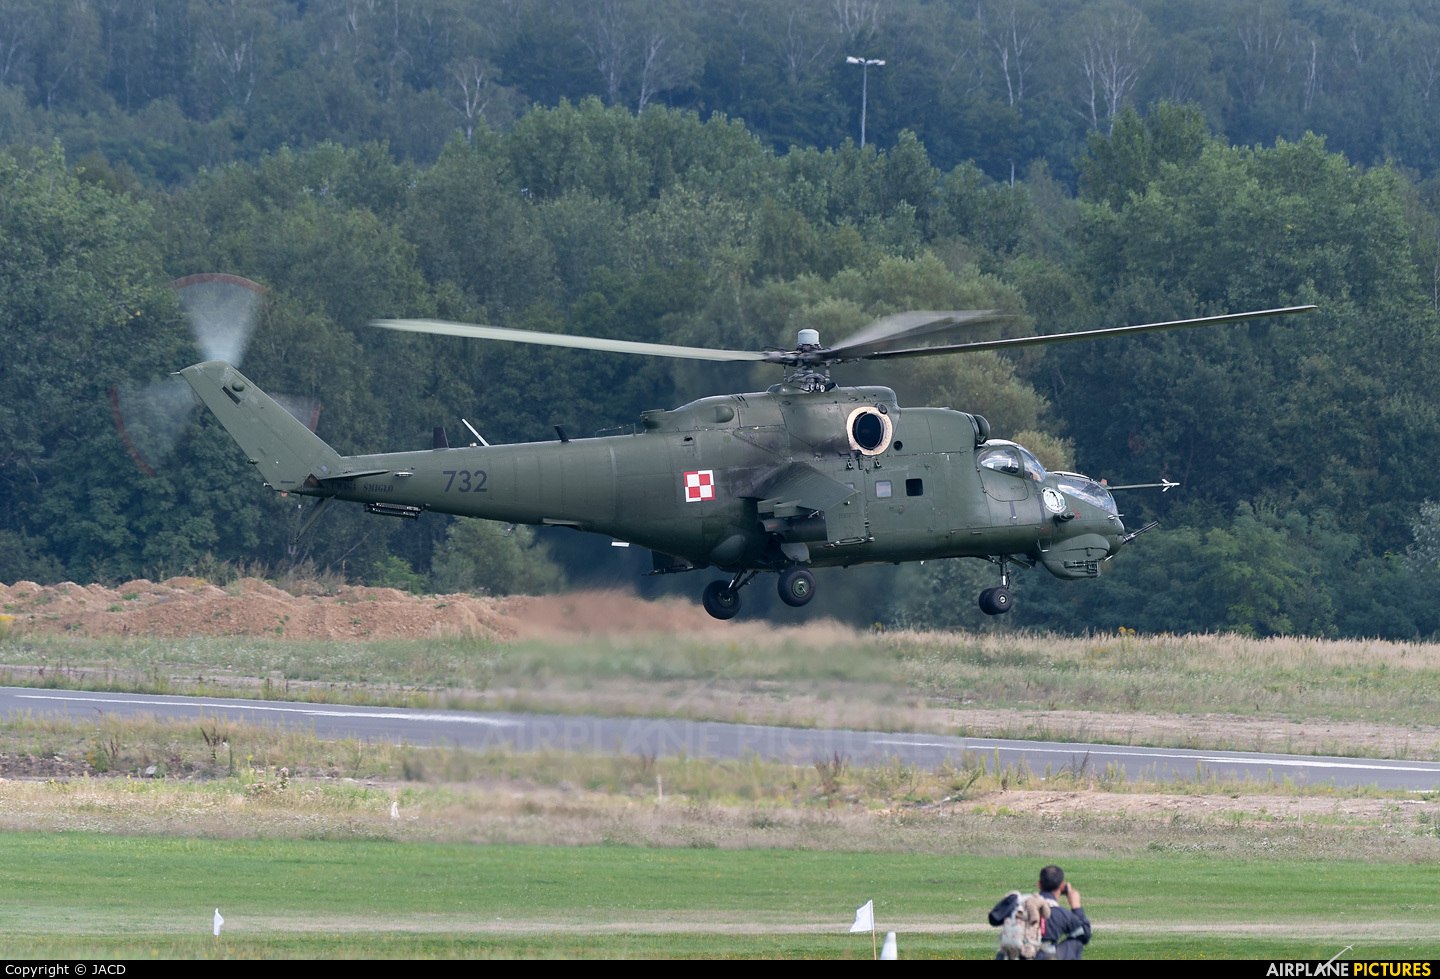 Poland - Army 732 aircraft at Katowice Muchowiec